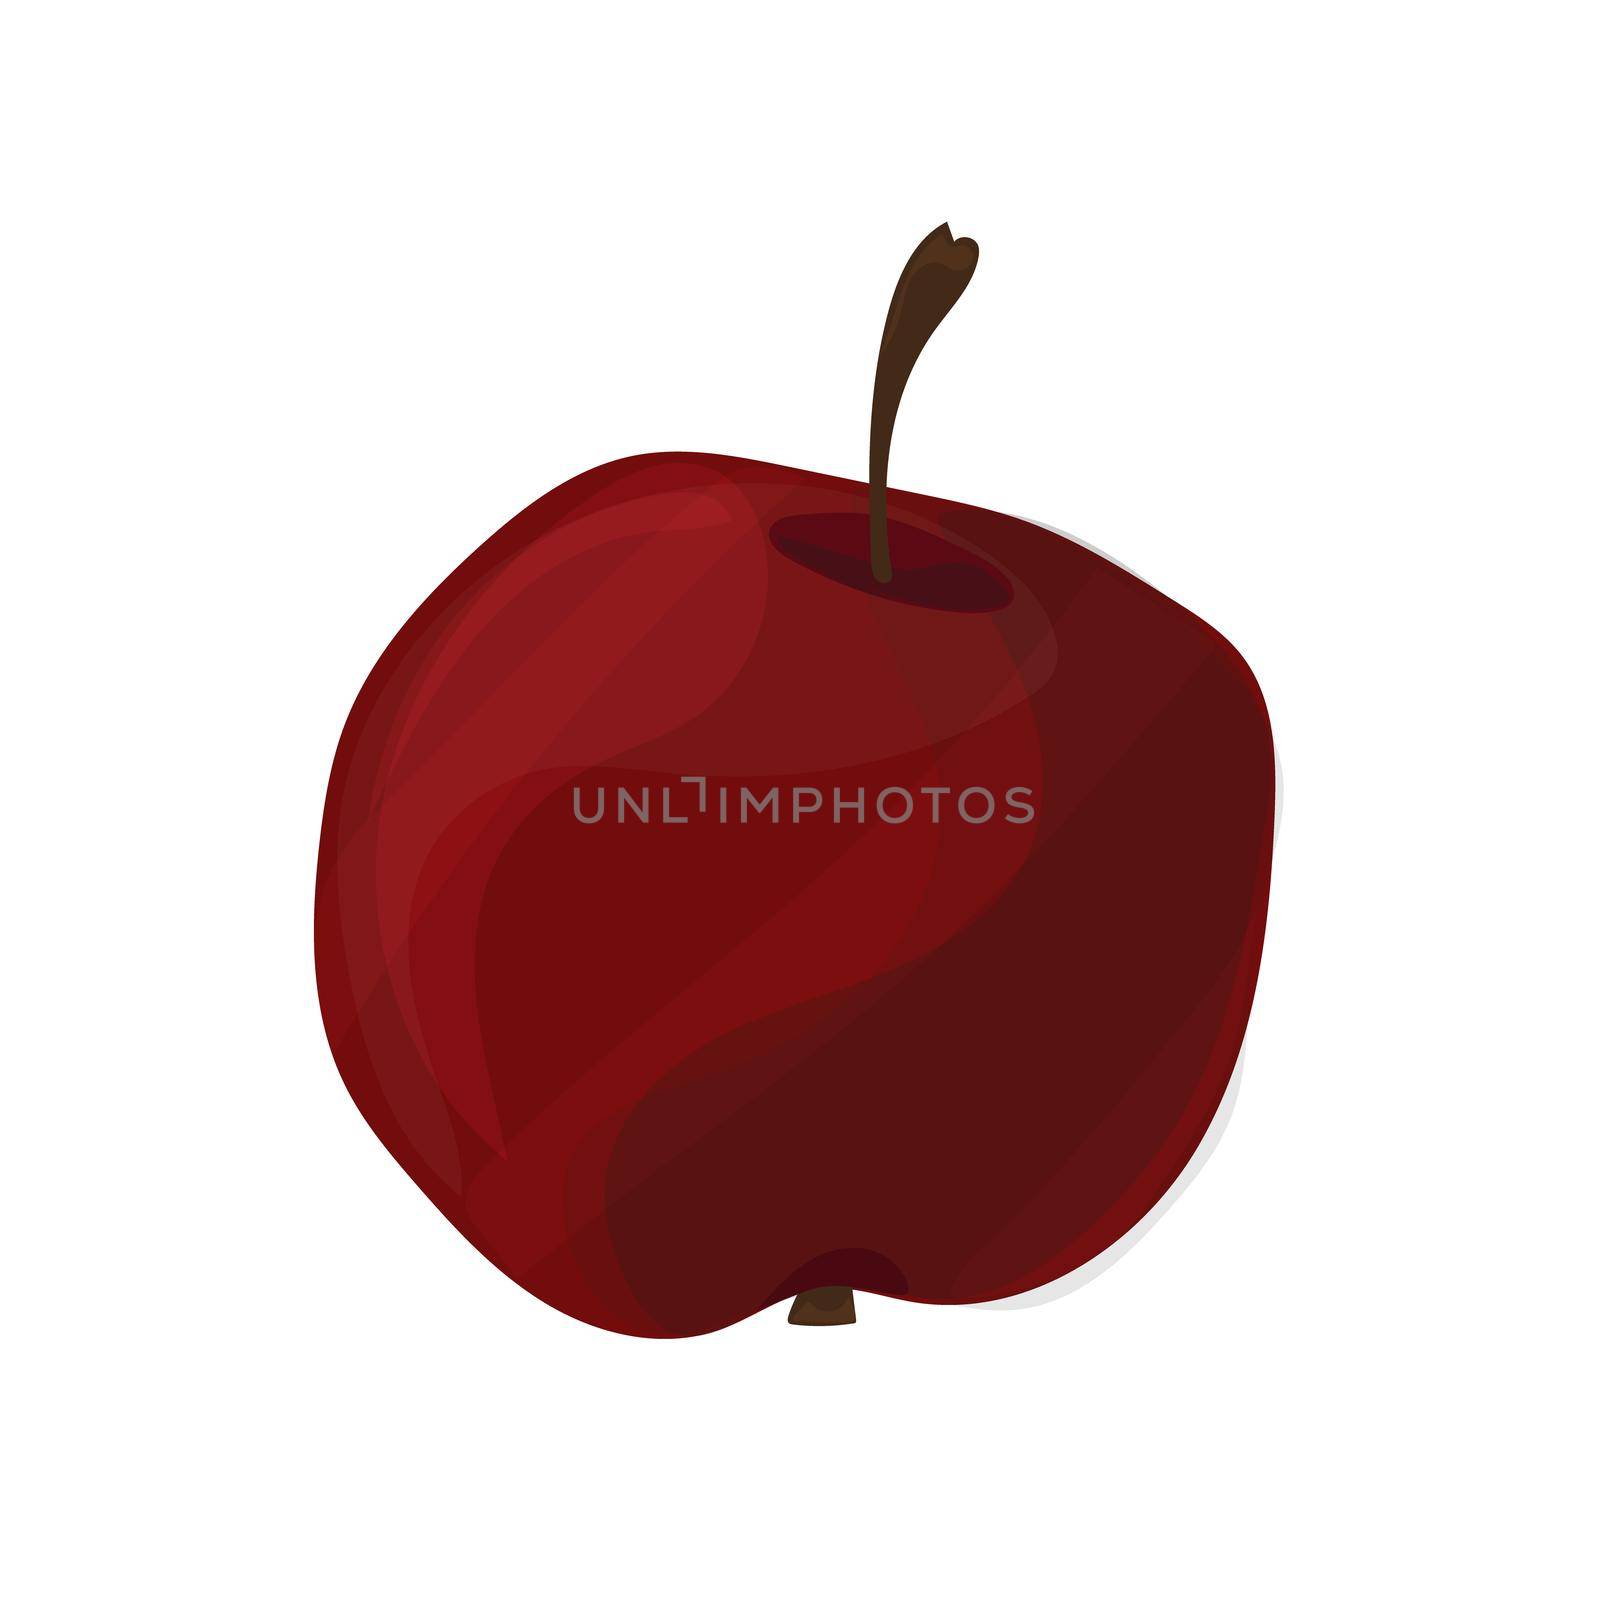 Red apple with highlights. Cartoon style. Vector illustration on white background